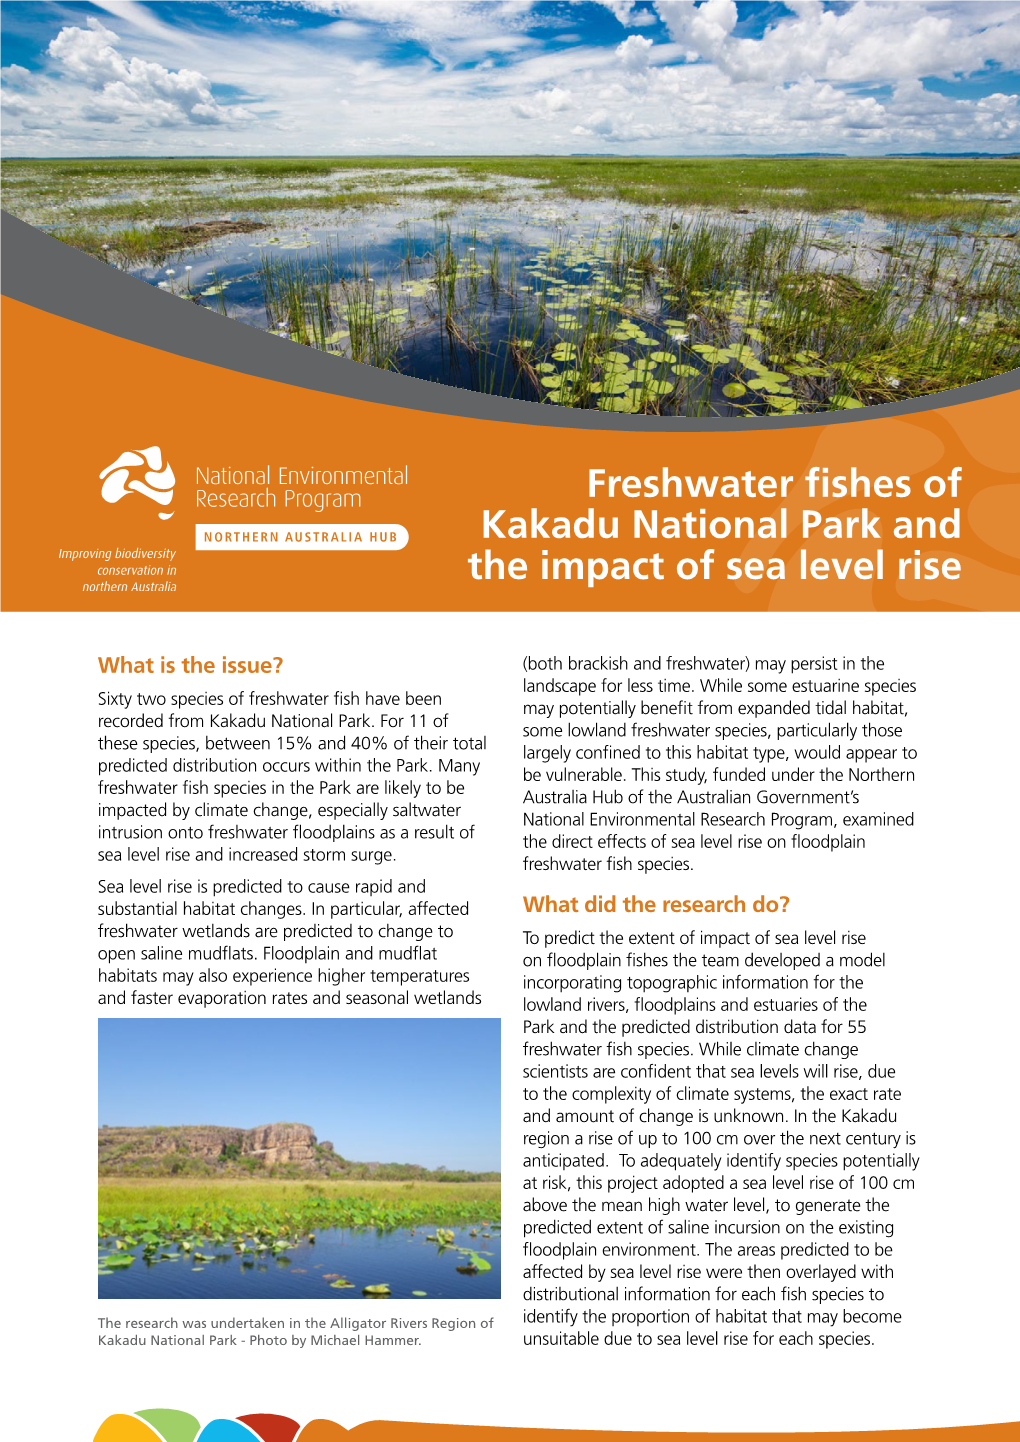 Freshwater Fishes of Kakadu National Park and the Impact of Sea Level Rise